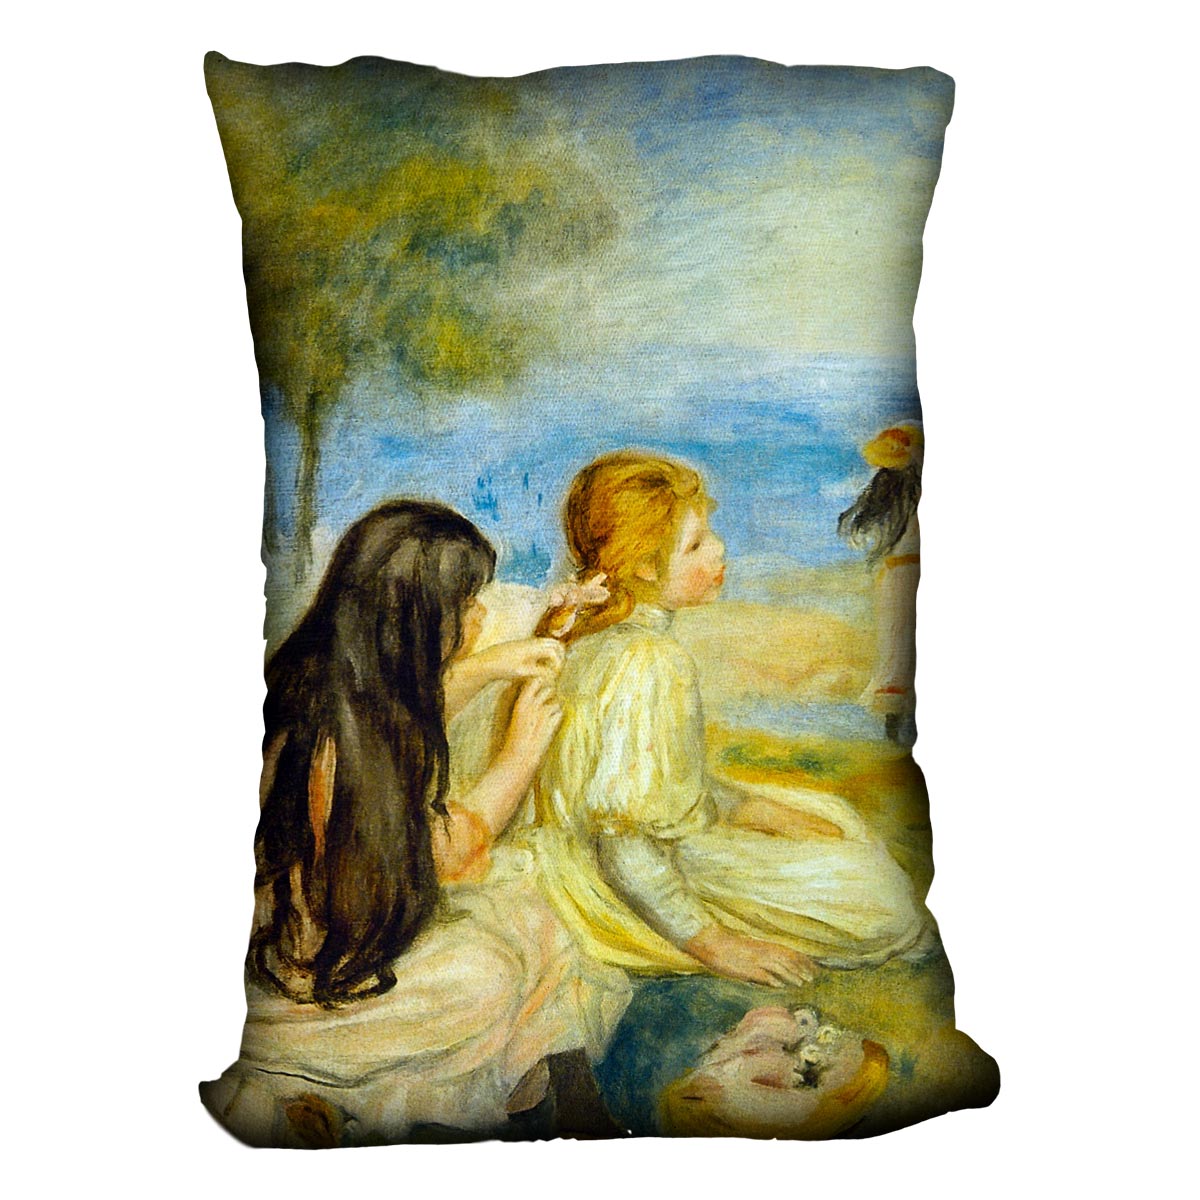 Girls by the Seaside by Renoir Cushion